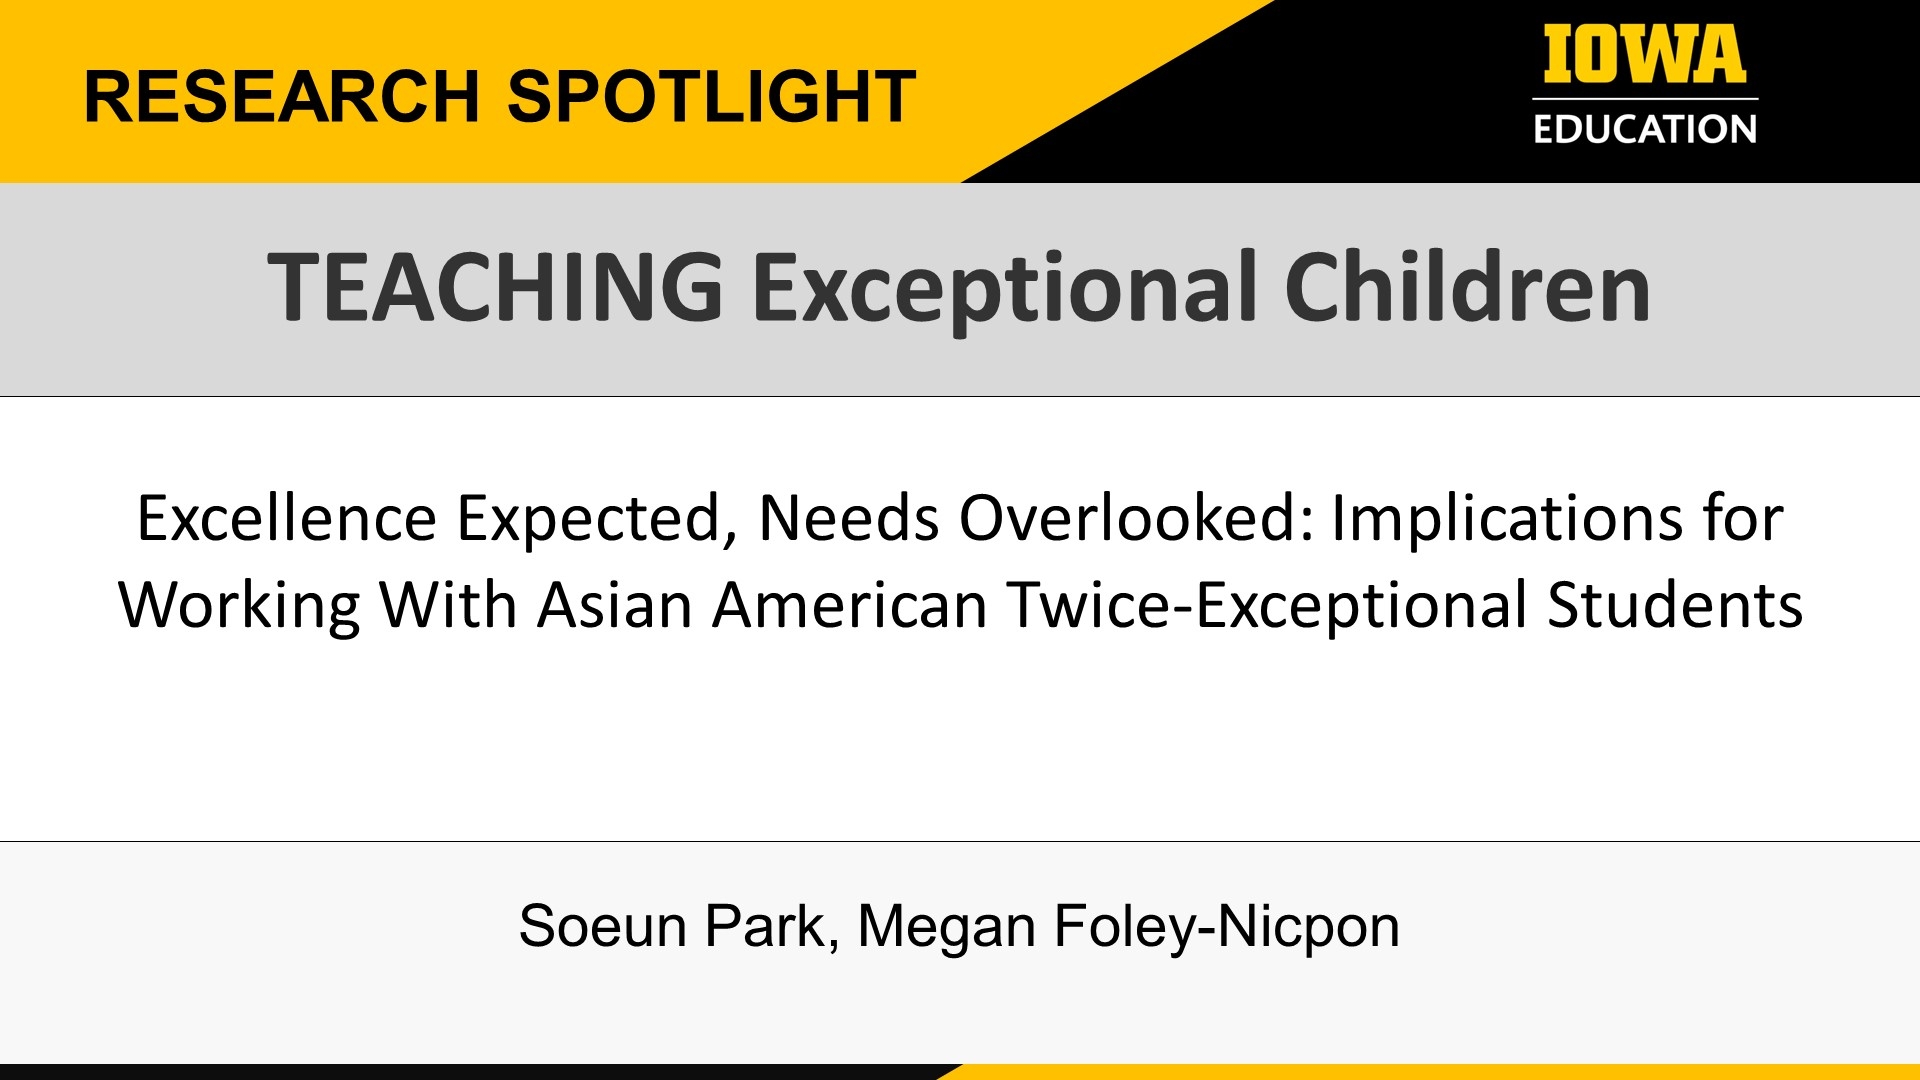 Research Spotlight: Excellence Expected, Needs Overlooked: Implications for Working With Asian American Twice-Exceptional Students. In TEACHING Exceptional Children